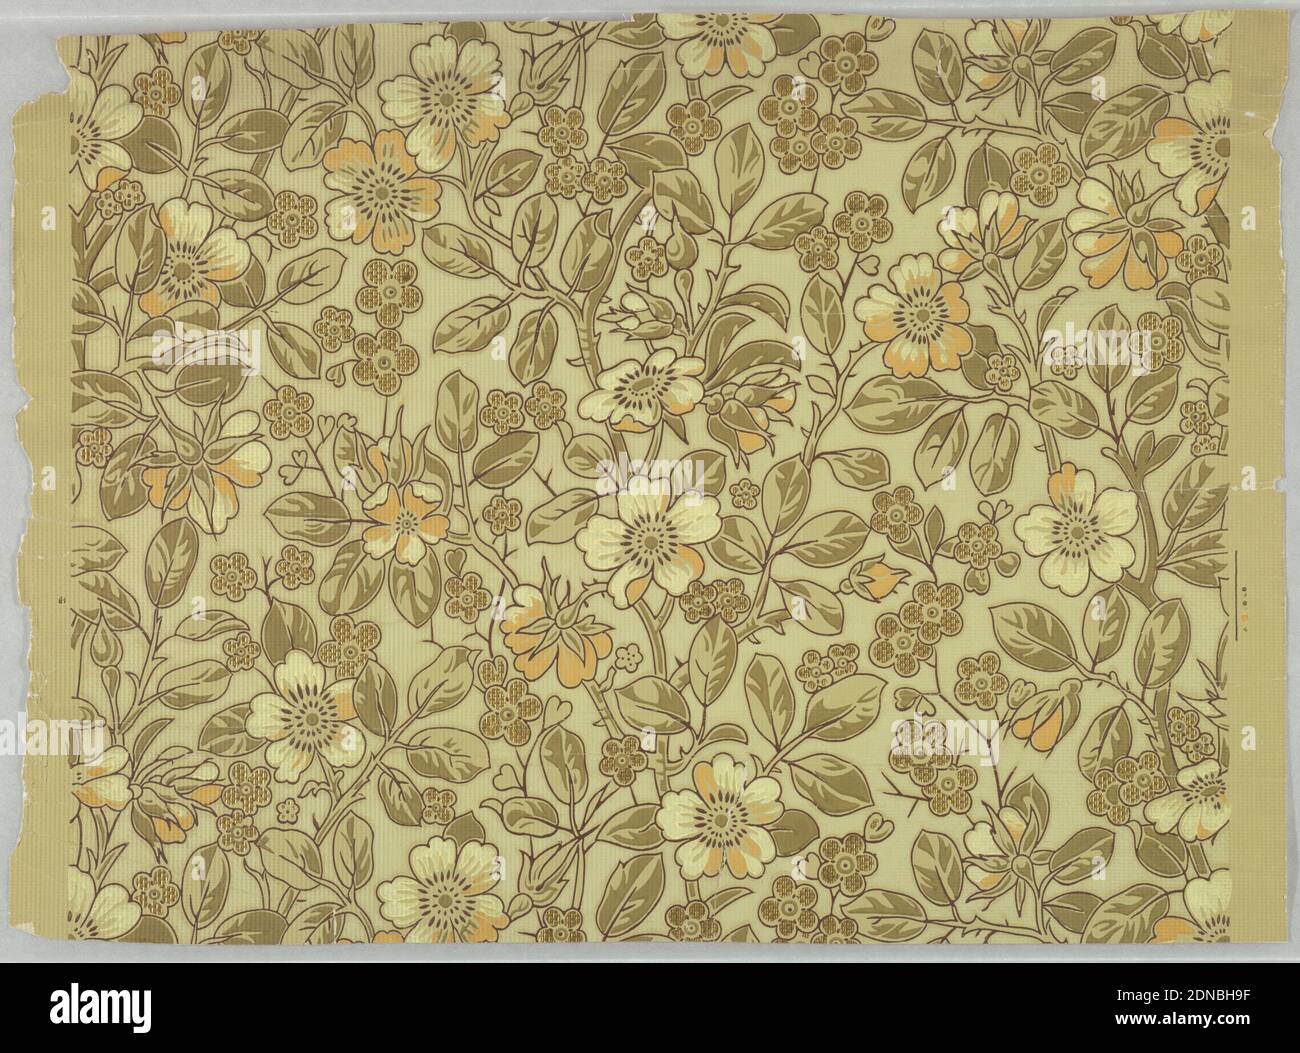 Sidewall, Machine-printed, All-over vining floral pattern. Printed in shades of green, white and metallic gold on pale green background., 1870–90, Wallcoverings, Sidewall Stock Photo